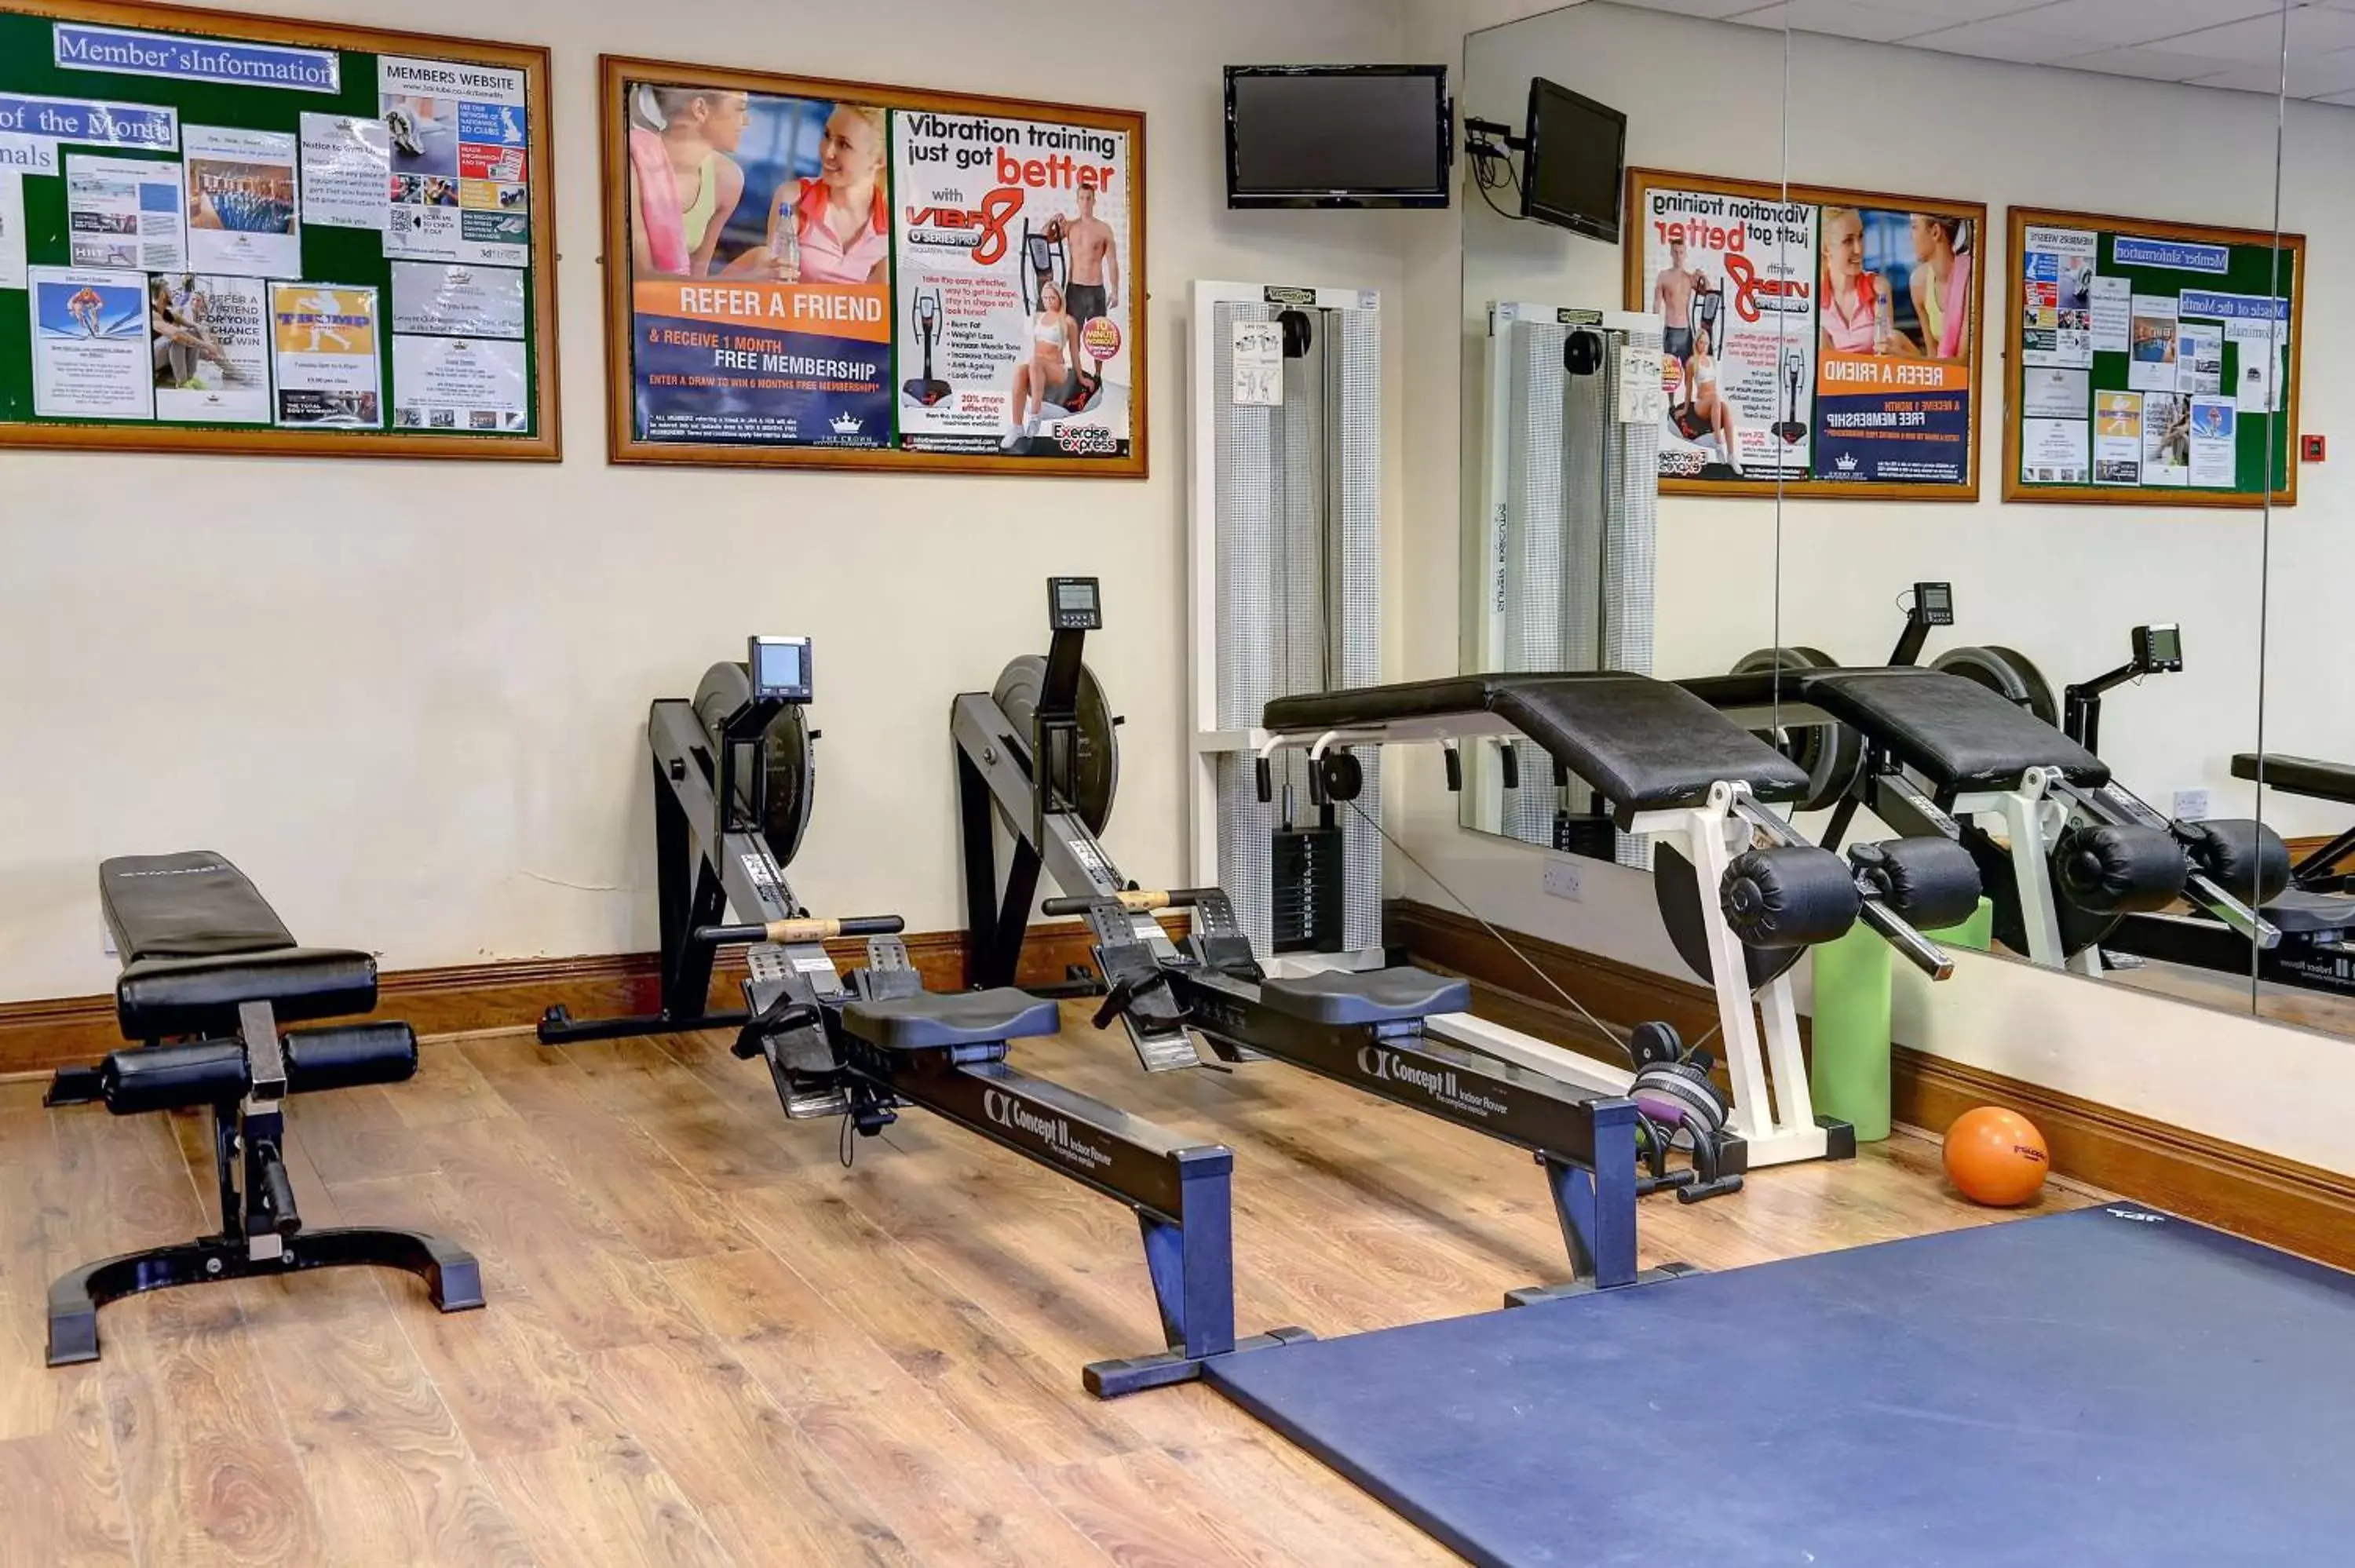 Fitness centre/facilities, Fitness Center/Facilities in The Crown Hotel, Boroughbridge, North Yorkshire